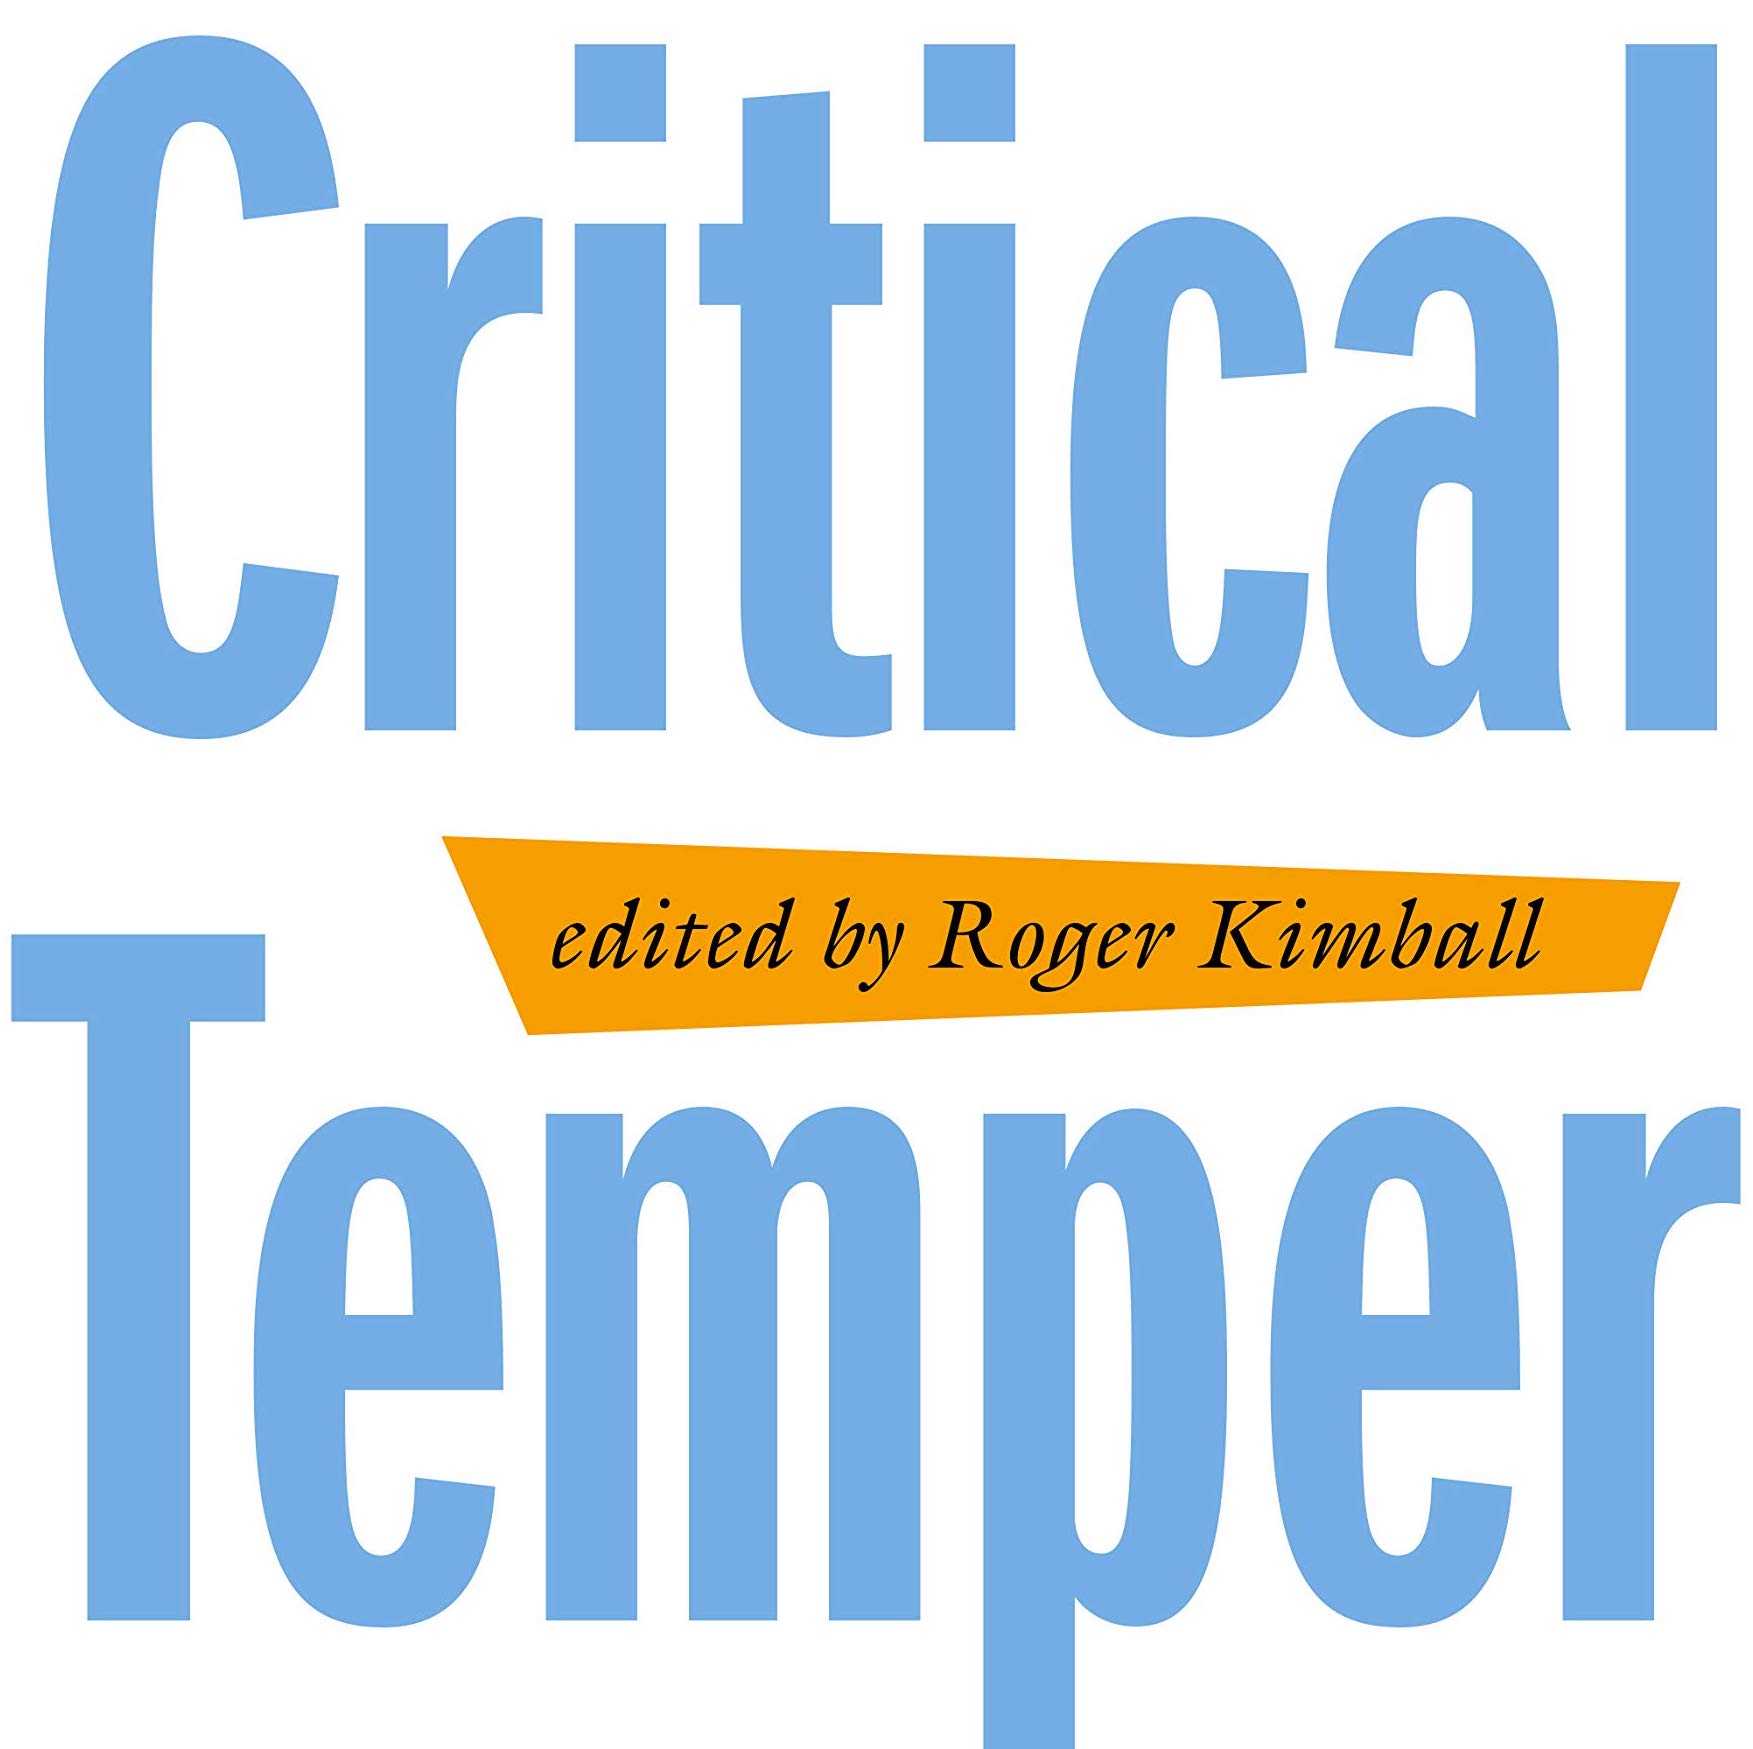 Roger Kimball on “The Critical Temper”